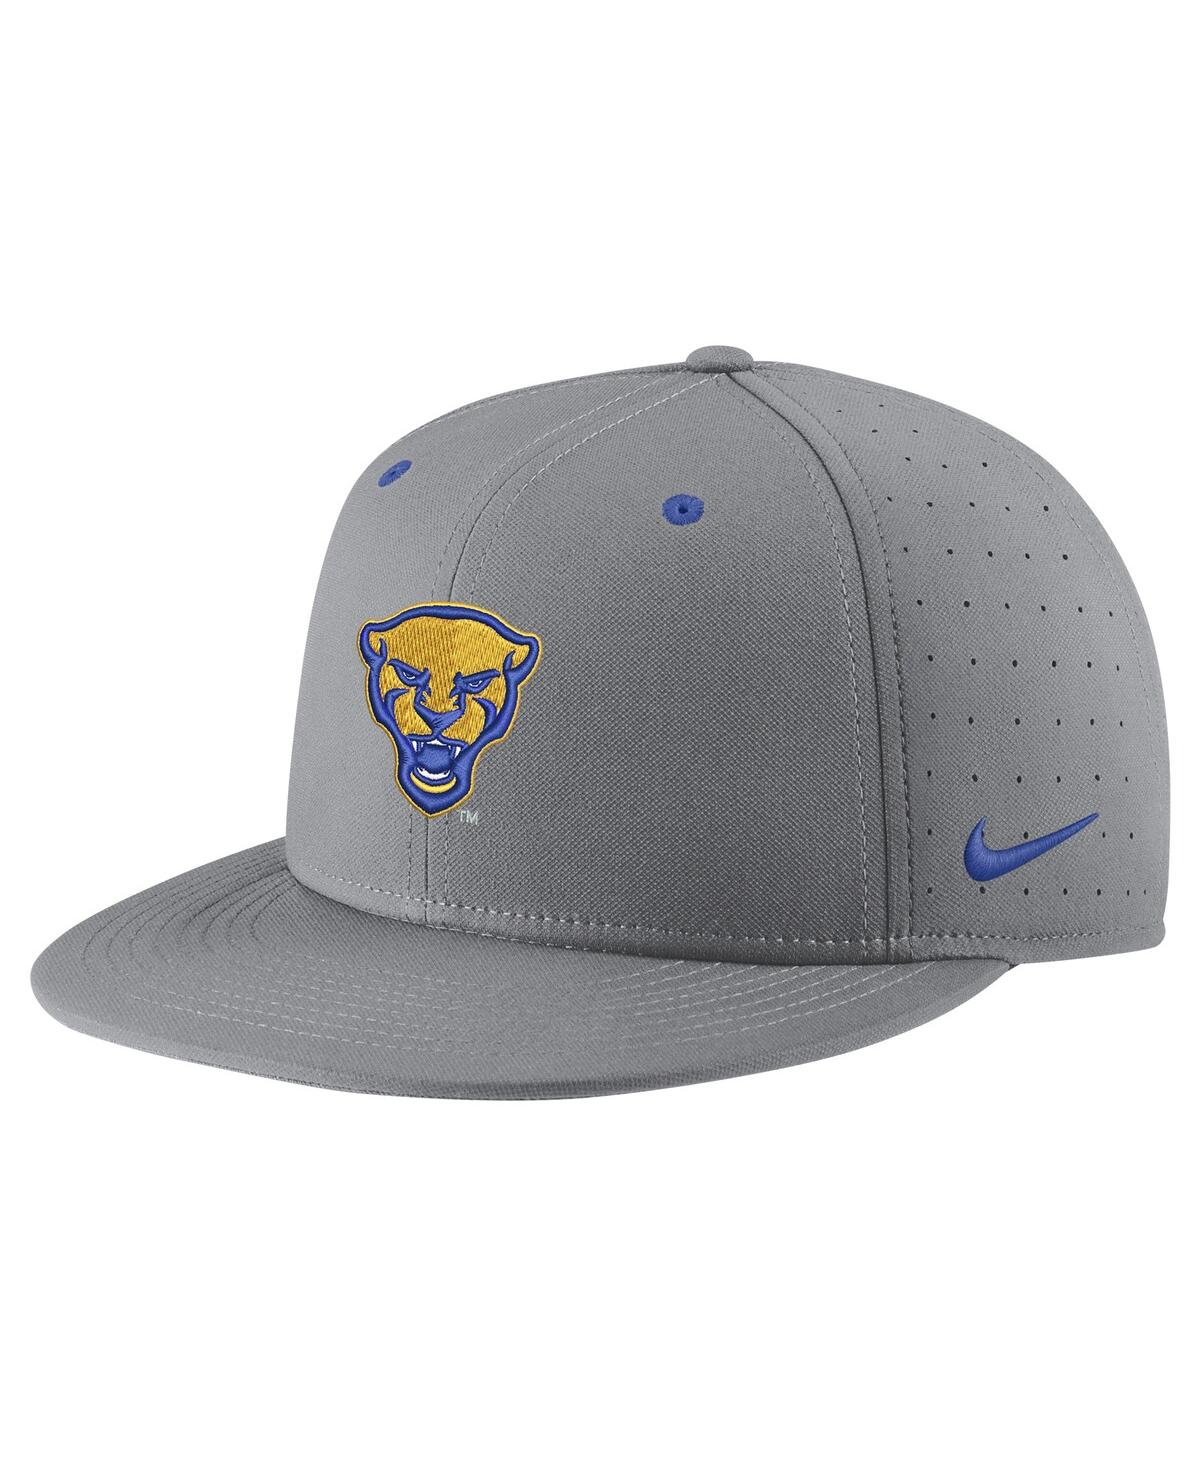 Shop Nike Men's  Gray Pitt Panthers Usa Side Patch True Aerobill Performance Fitted Hat